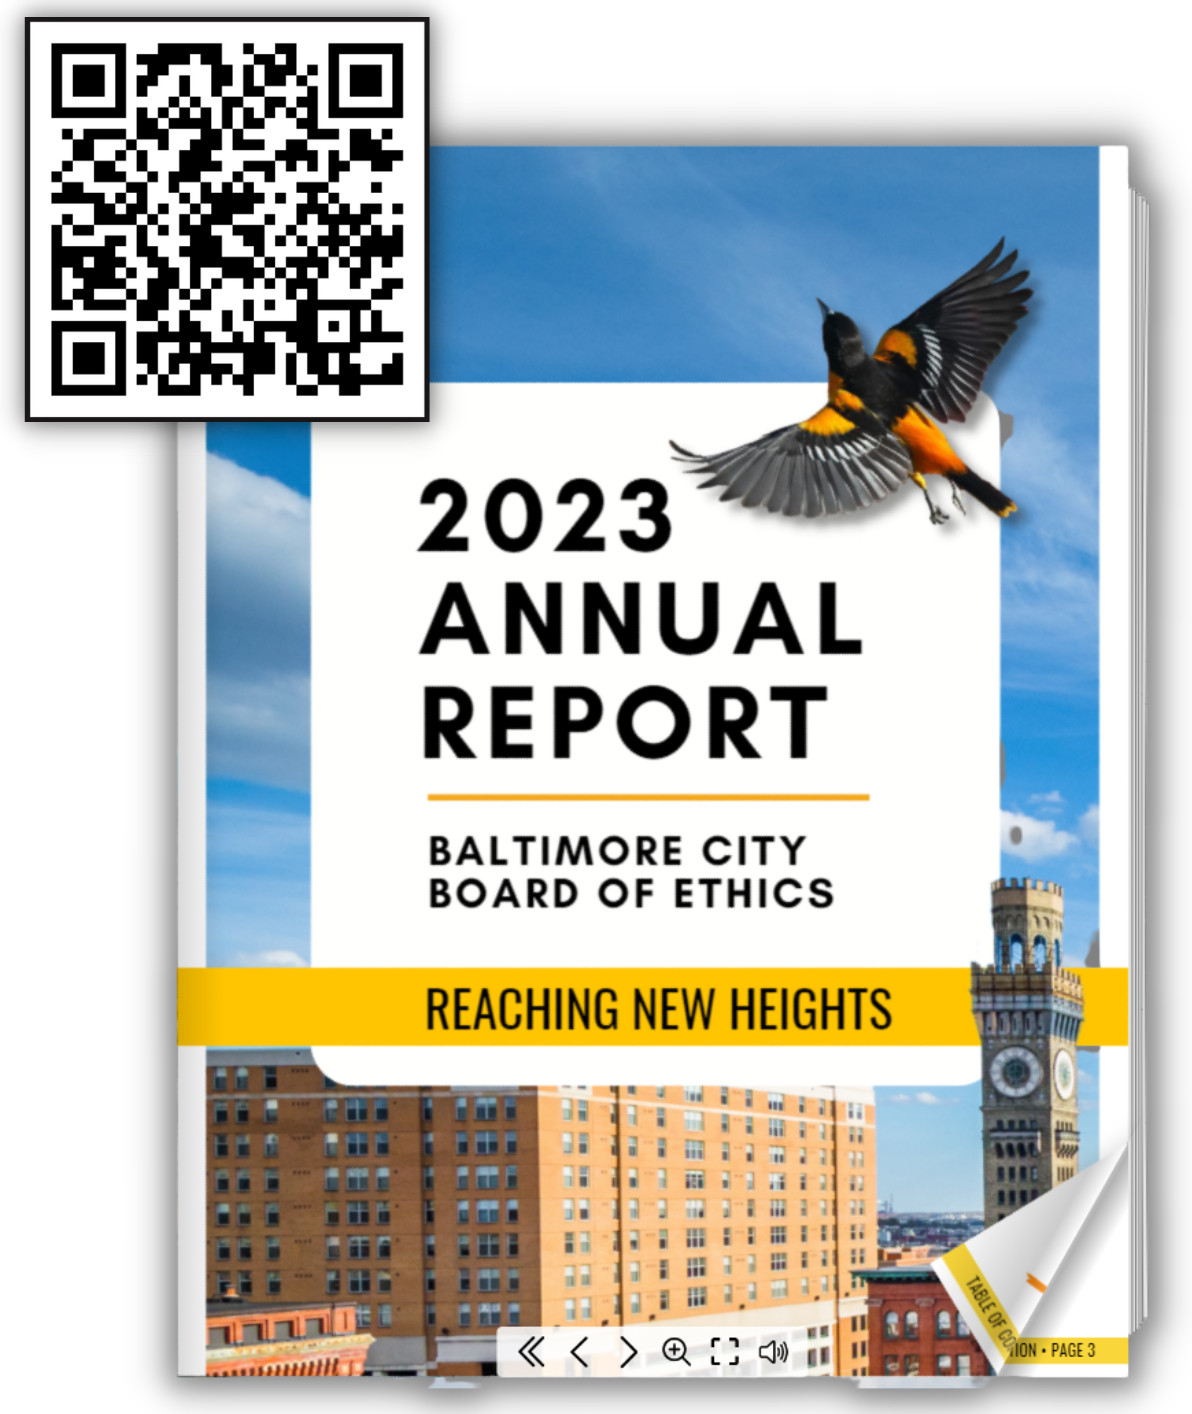 Read the Ethics Board's 2023 Annual Report here.